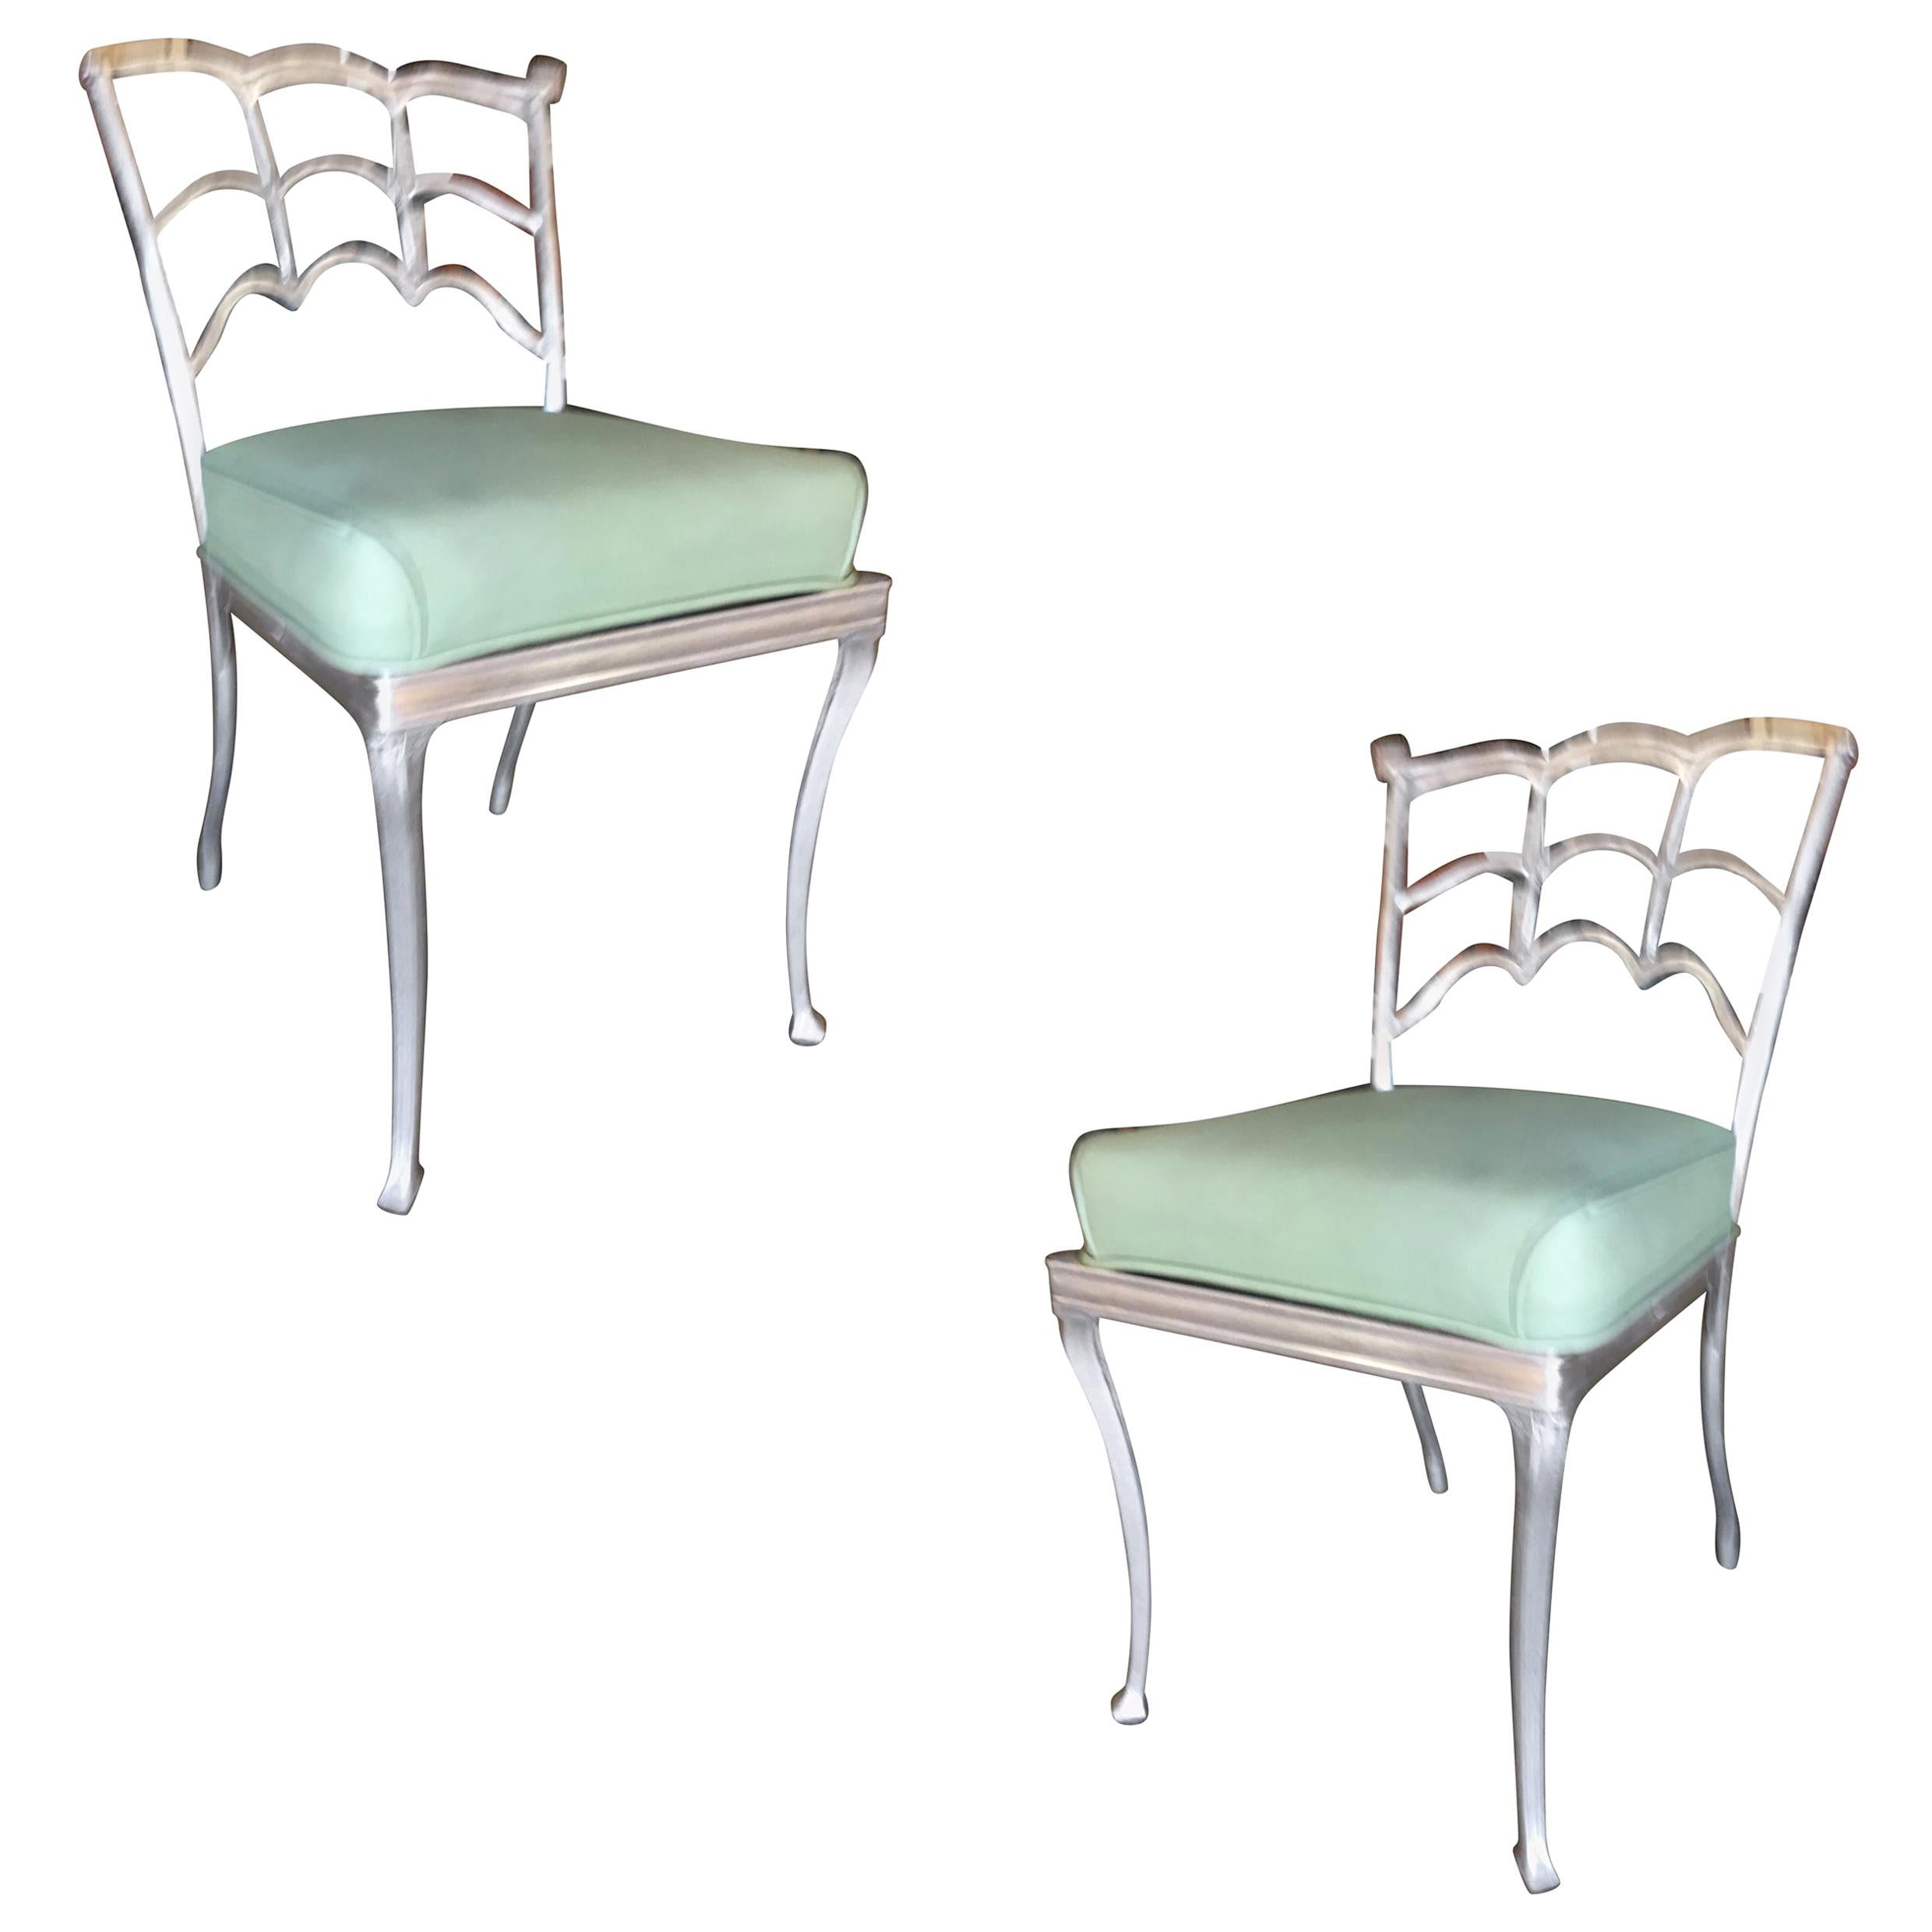 Art Deco Silver Tone Casted Aluminum Spiderweb Side Chair, Pair